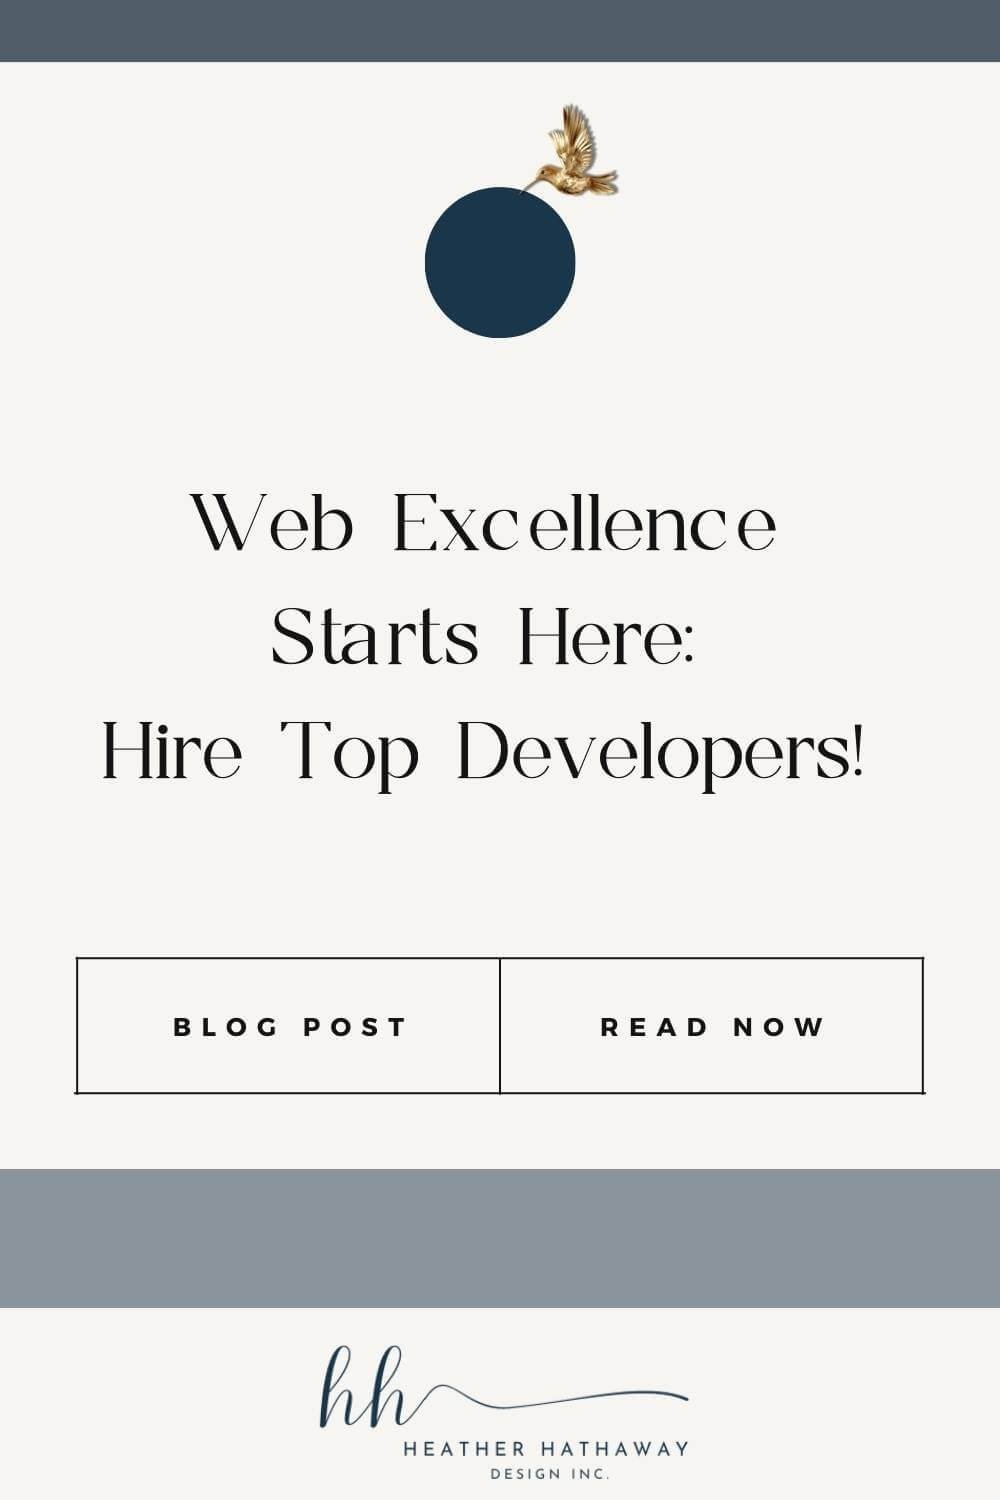 Web Excellence Starts Here Hire Top Developers 1.jpg